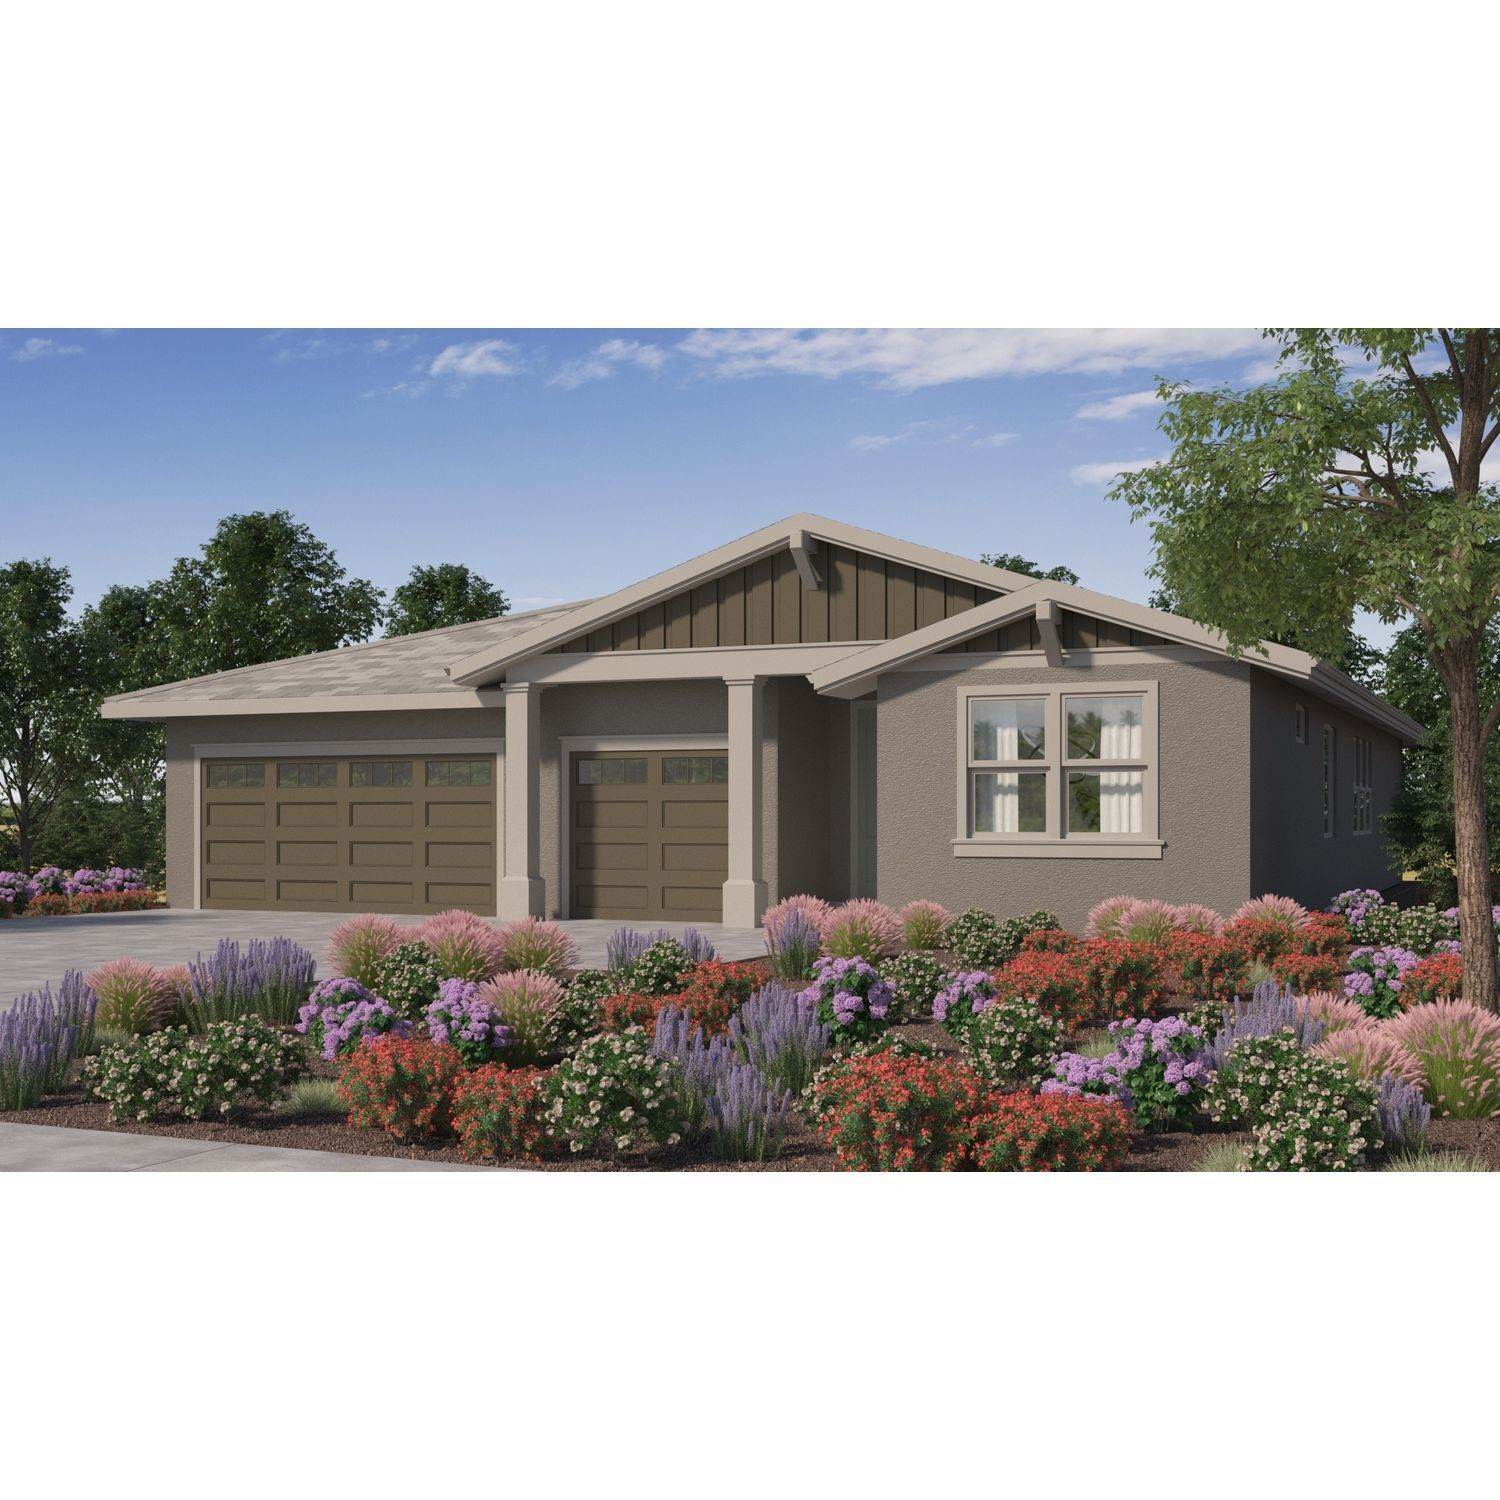 Single Family for Active at Heartland - Plan 2538 745 Main Street WINTERS, CALIFORNIA 95694 UNITED STATES